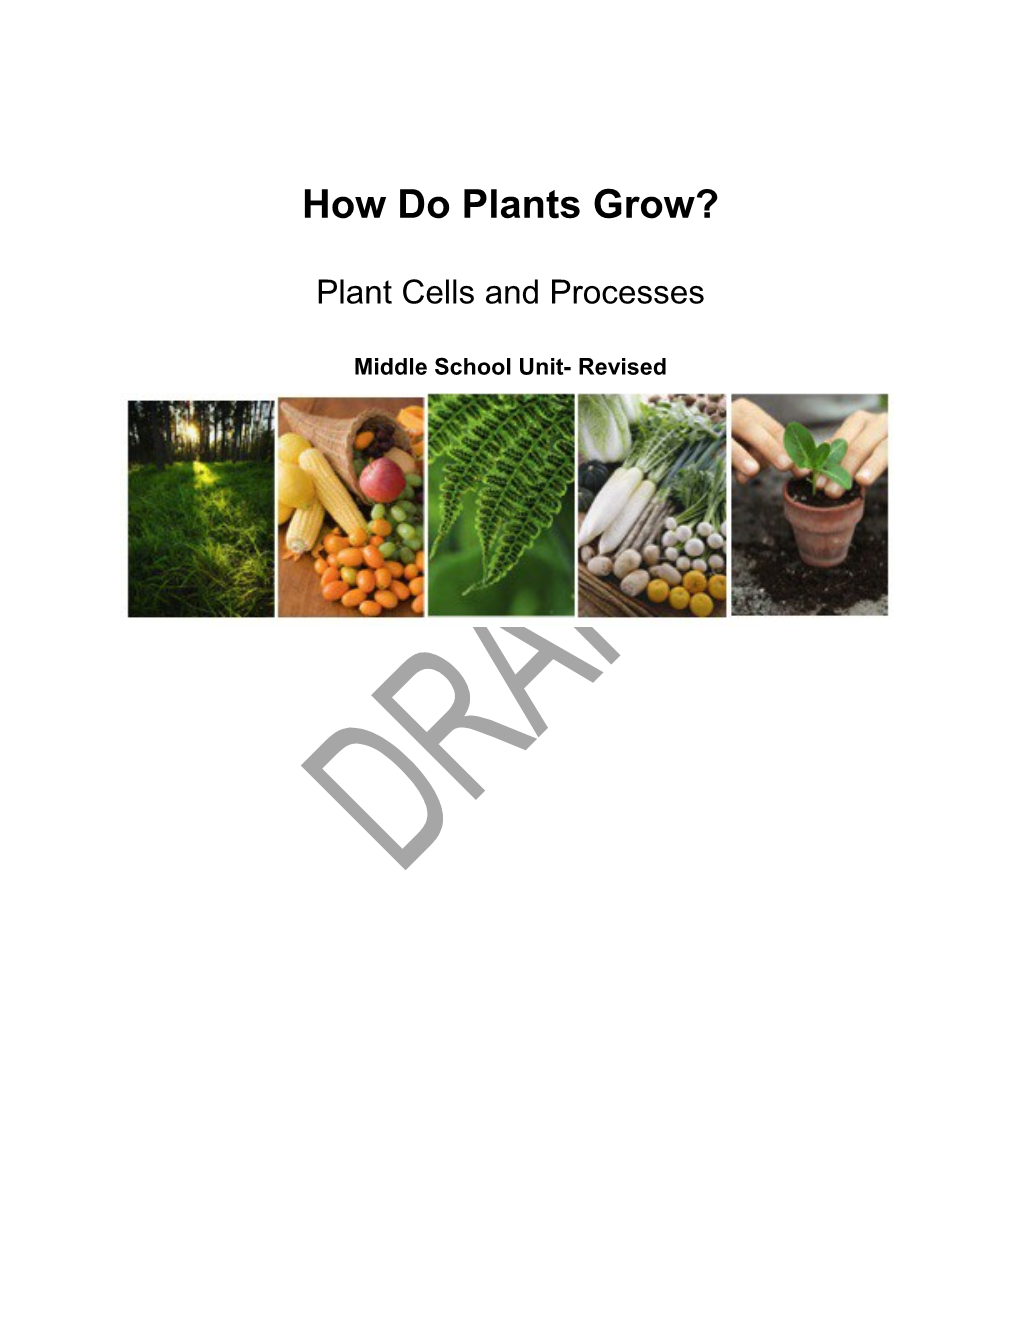 Activity 1: Do Plants Need Food and Air to Grow?